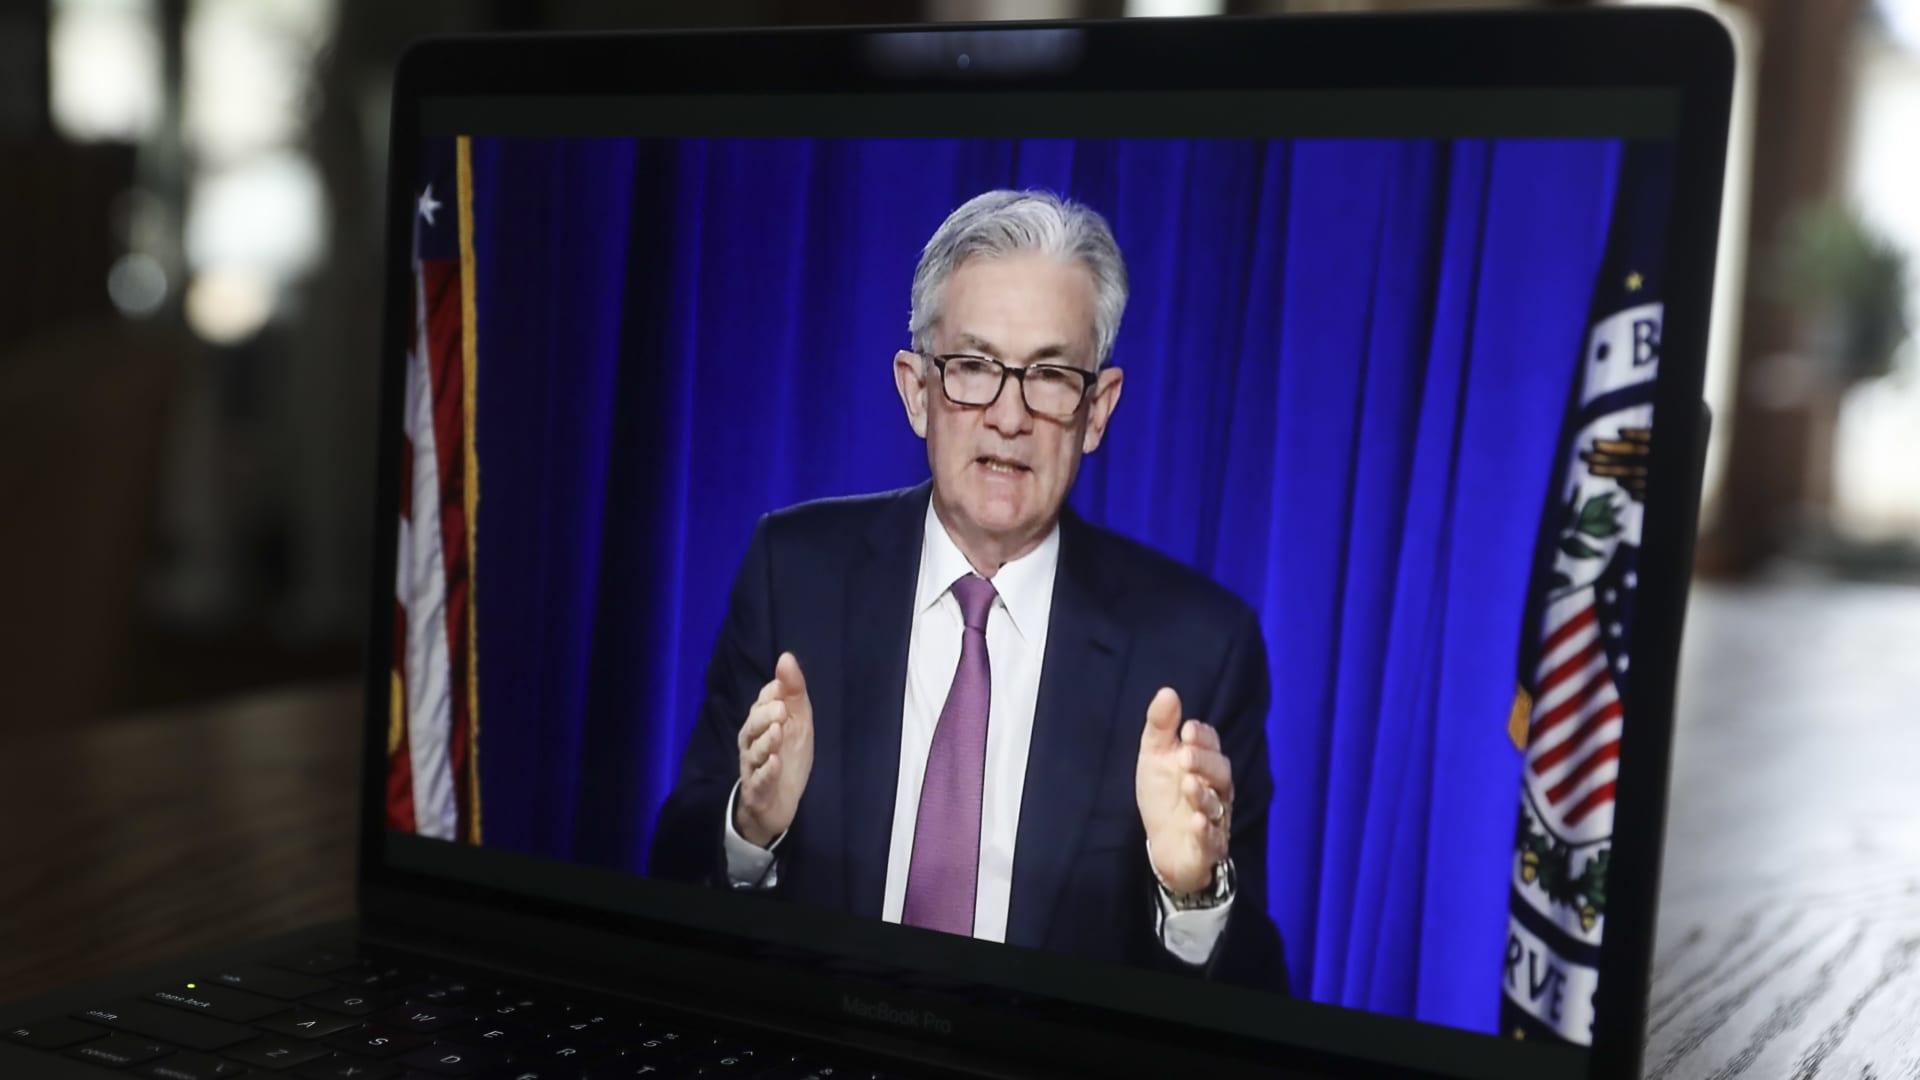 Federal Reserve Chairman Jerome Powell speaks at a virtual news conference in Tiskilwa, Illinois, on Dec. 16, 2020.